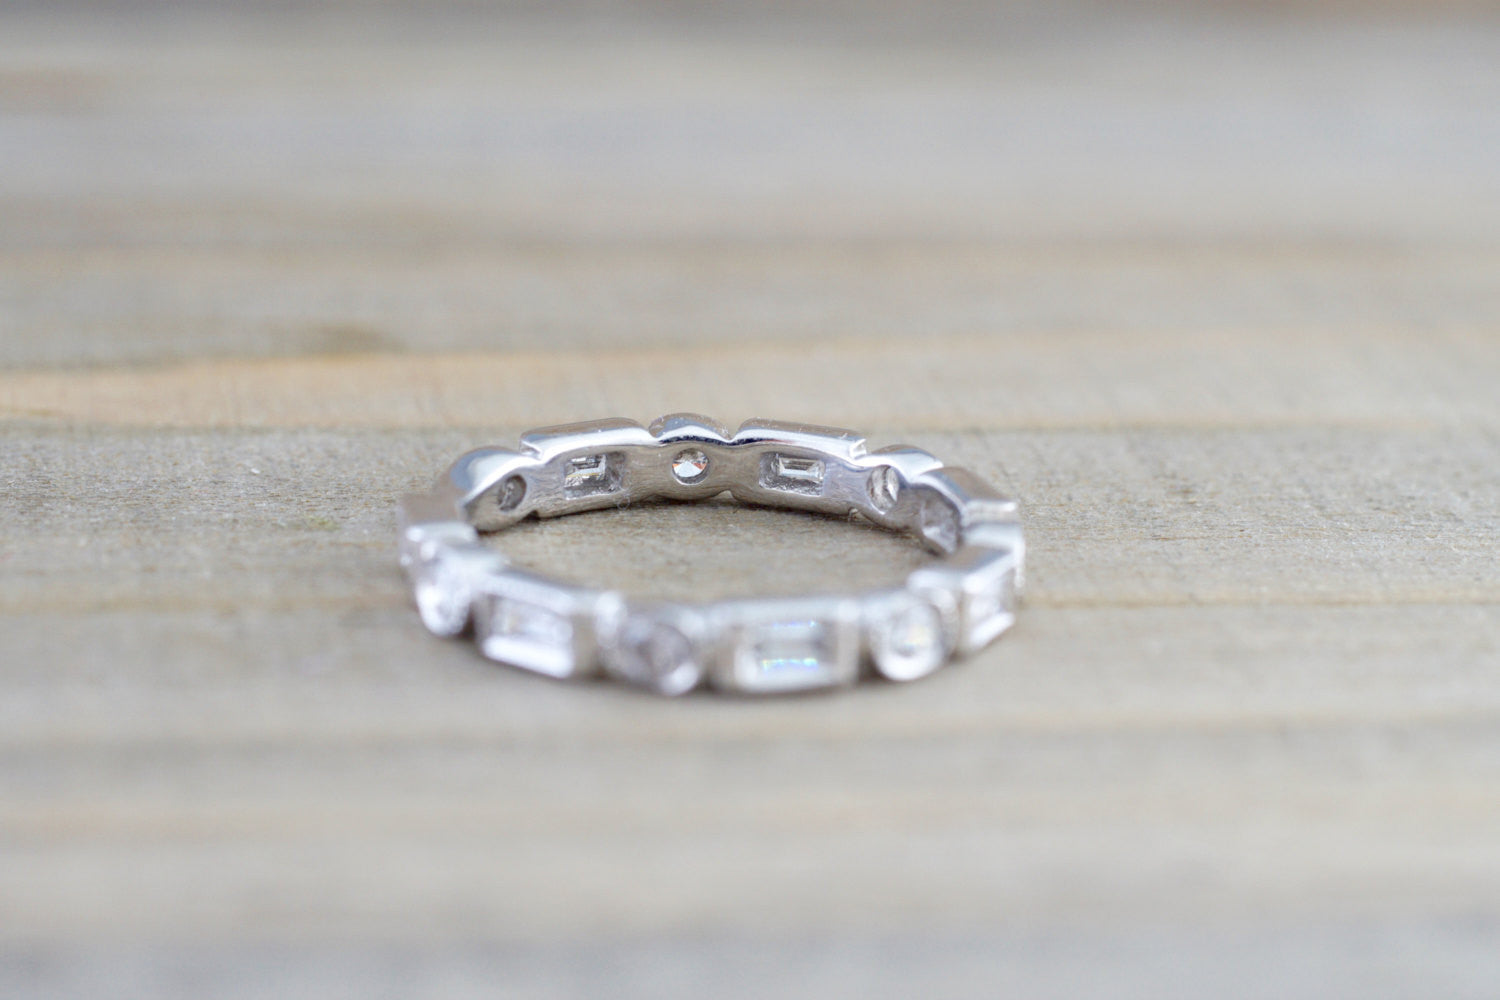 14k White Gold Brilliant Cut and Emerald Cut Diamond Eternity Band with Milgrain Stacking Stackable - Brilliant Facets